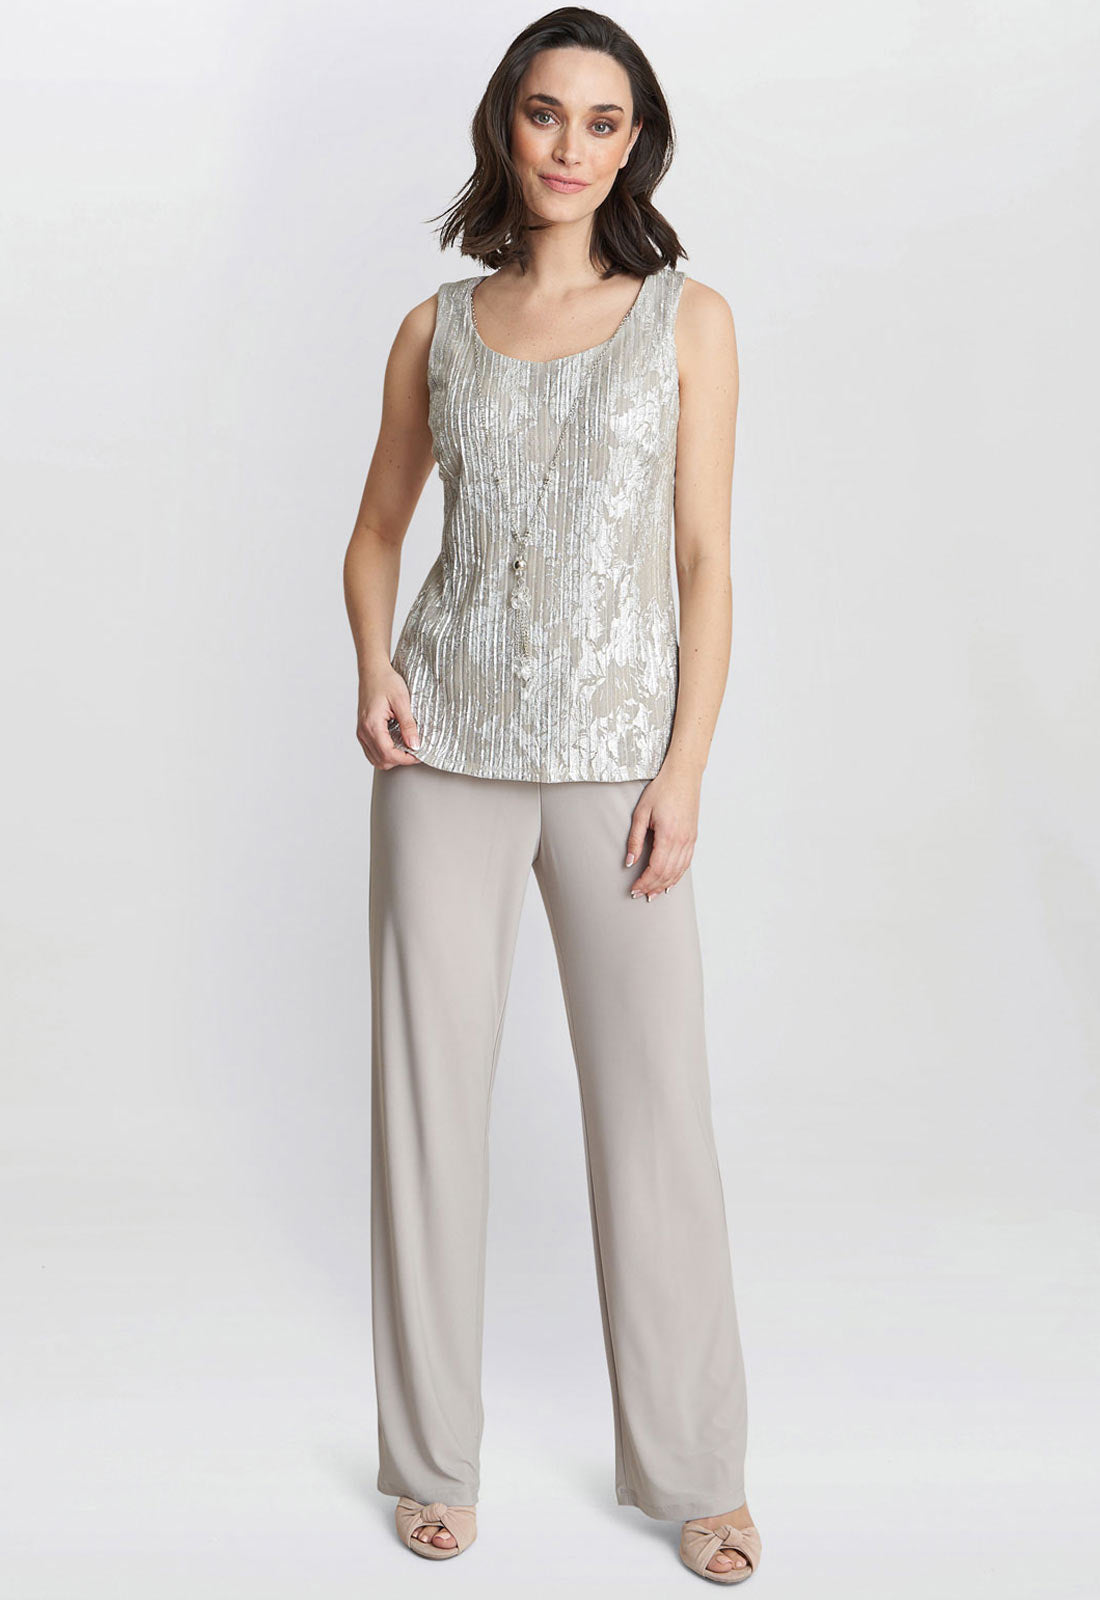 Gina Bacconi Champagne Mabel Three Piece Jacquard Trouser Suit